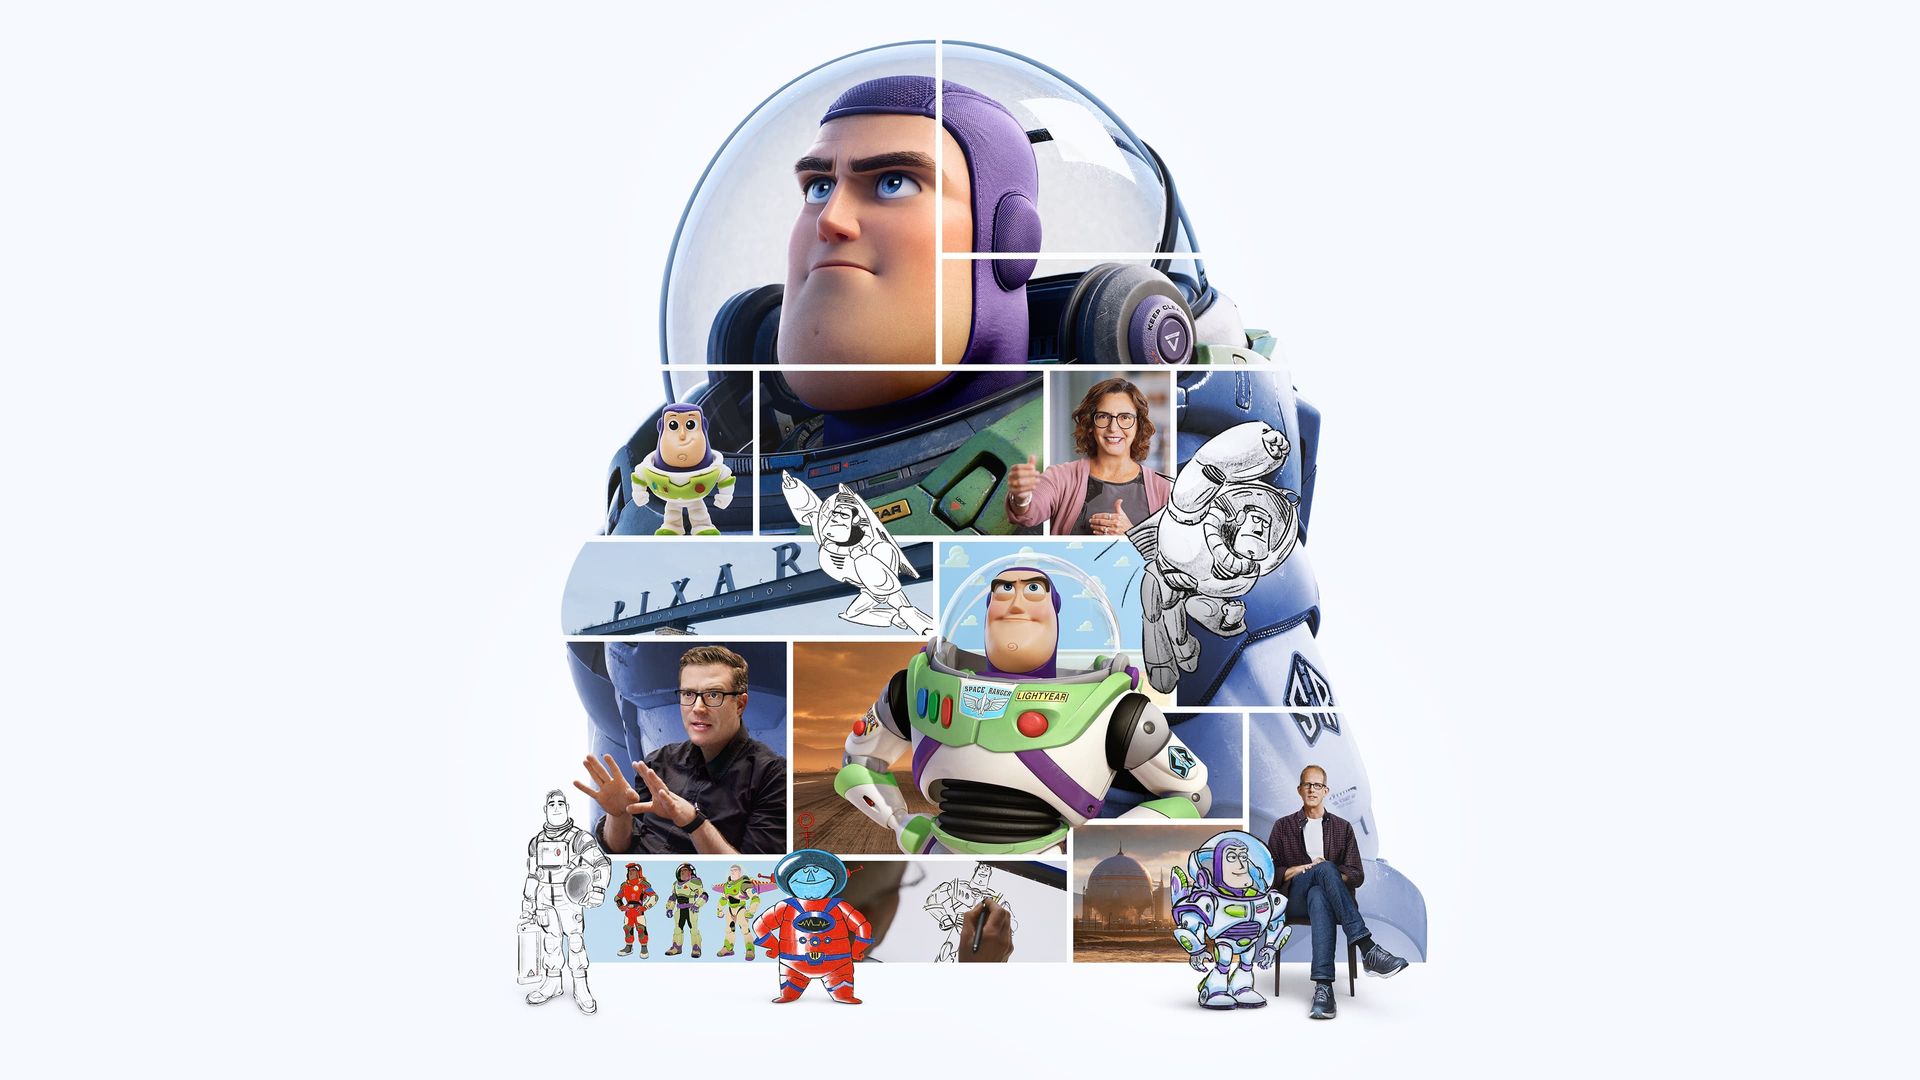 Beyond Infinity: Buzz and the Journey to Lightyear background